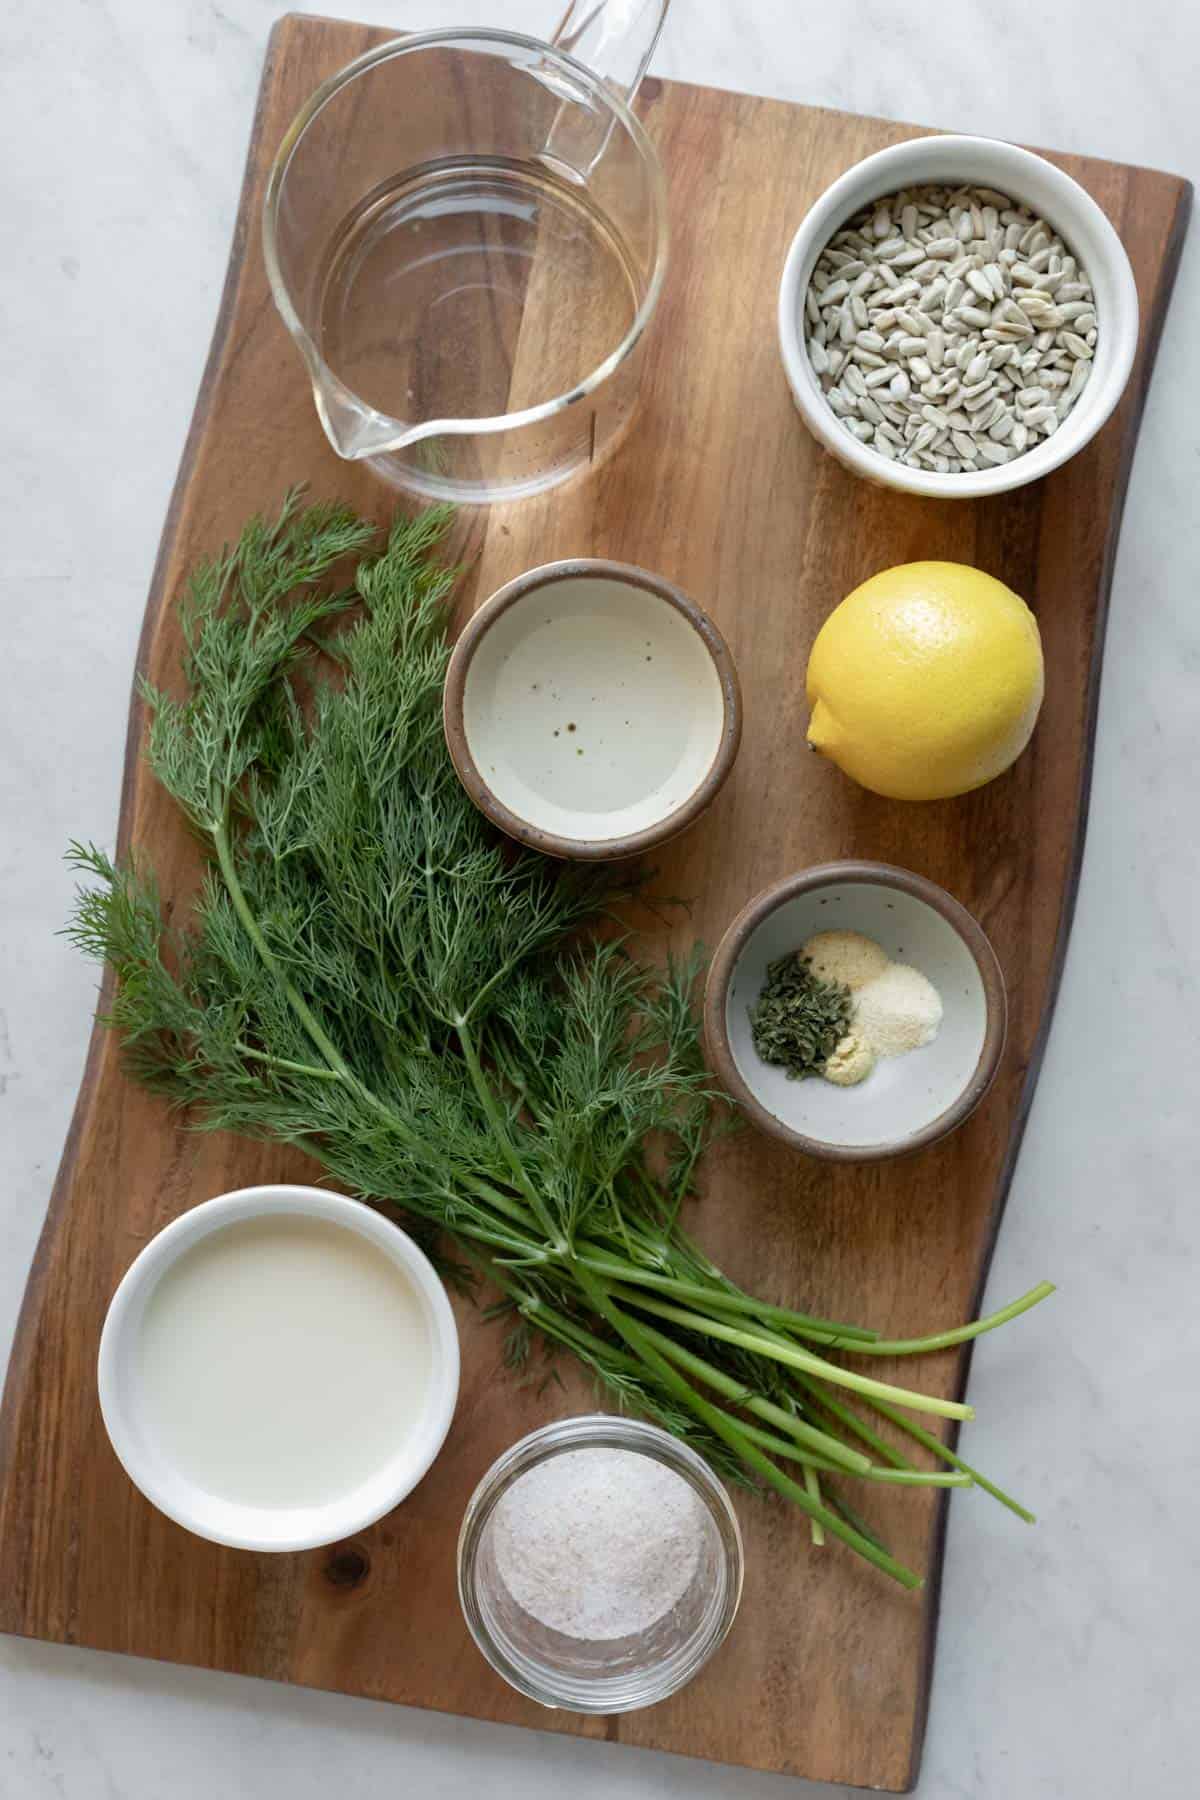 The 10 ingredients needed for vegan dill salad dressing.